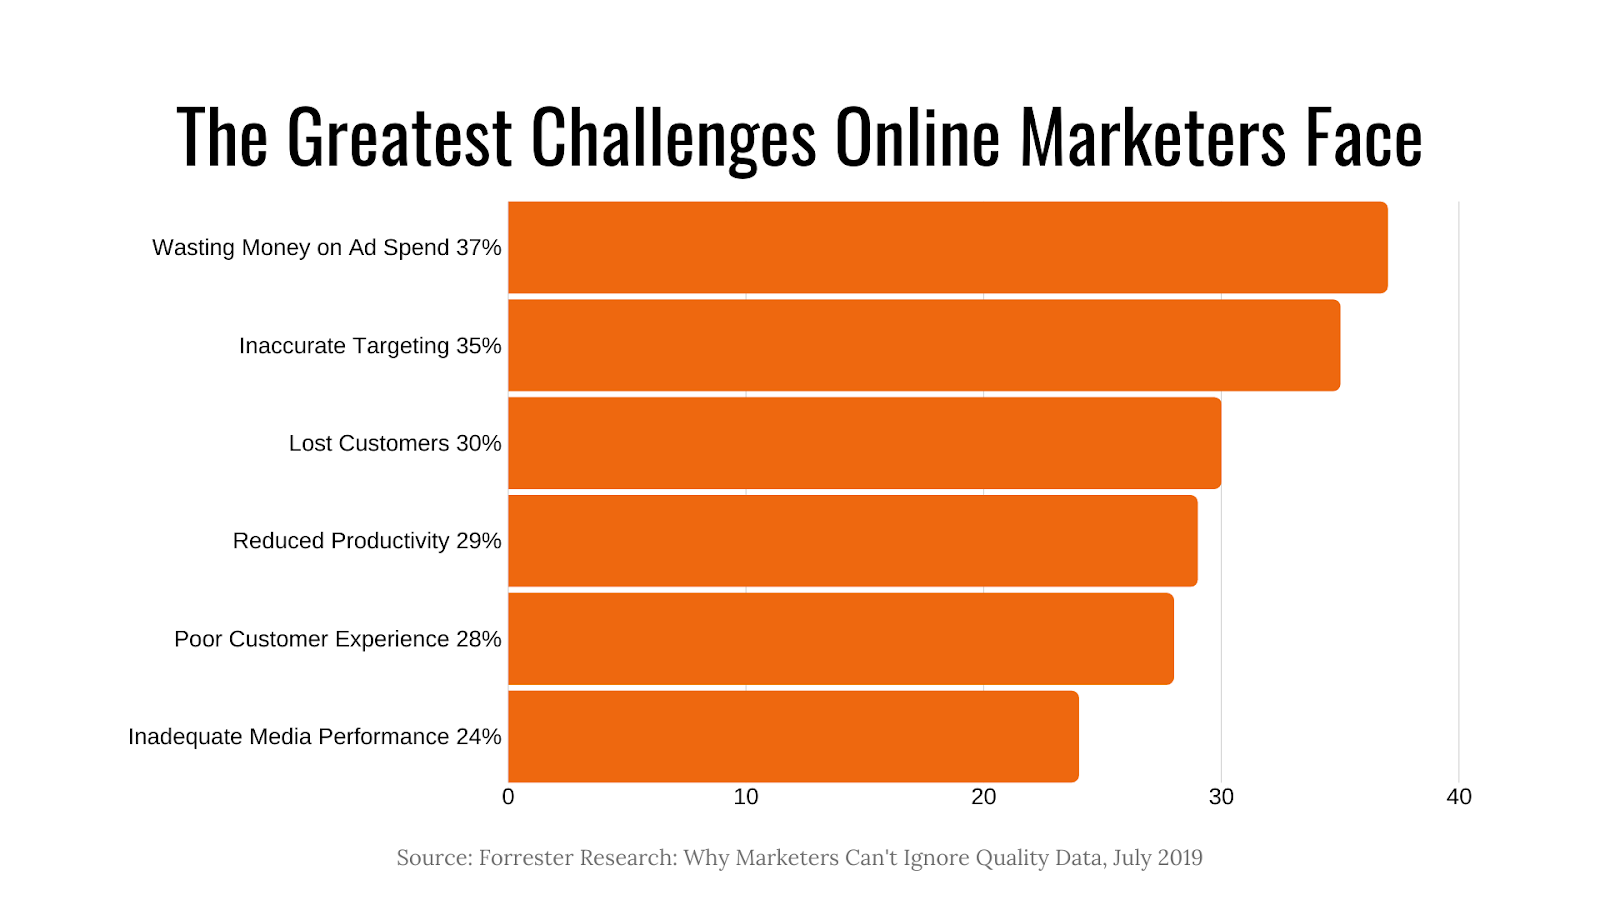 The Greatest Challenges Online Marketers Face